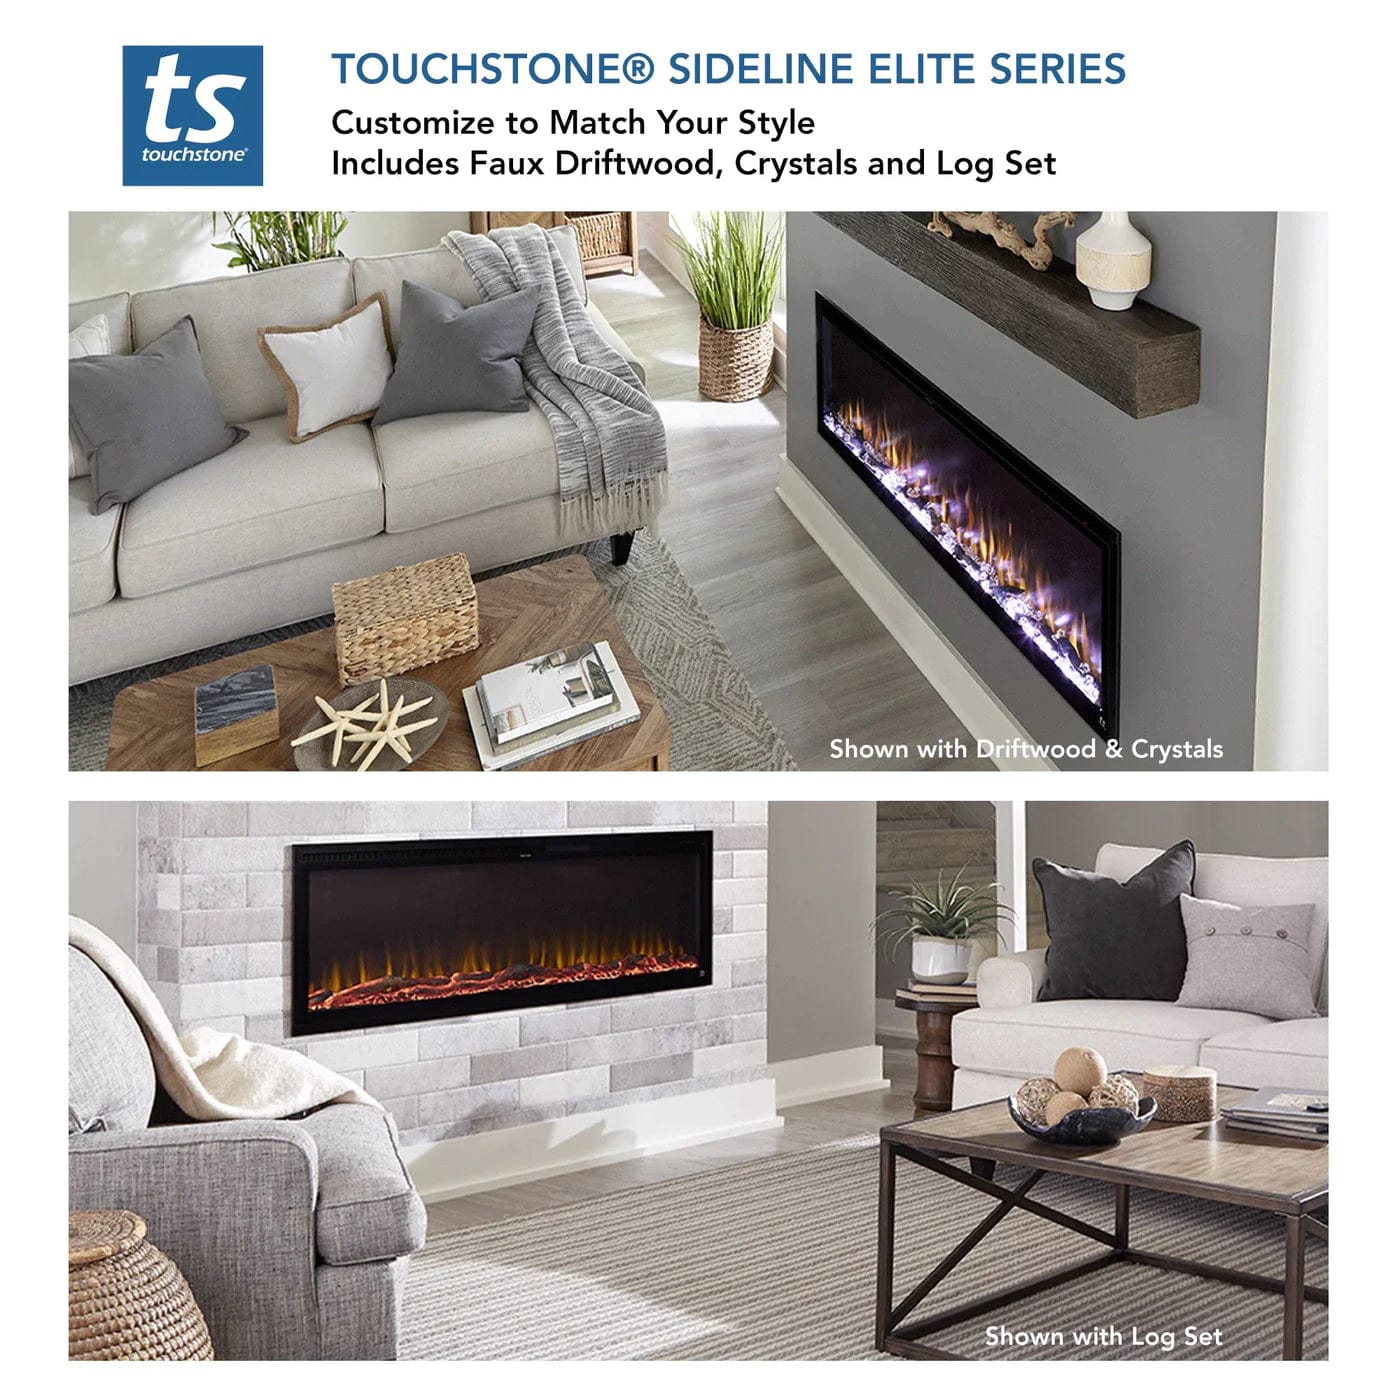 Touchstone 80044 100-Inch Sideline Elite Smart WiFi-Enabled Electric Fireplace (Alexa/Google Compatible)